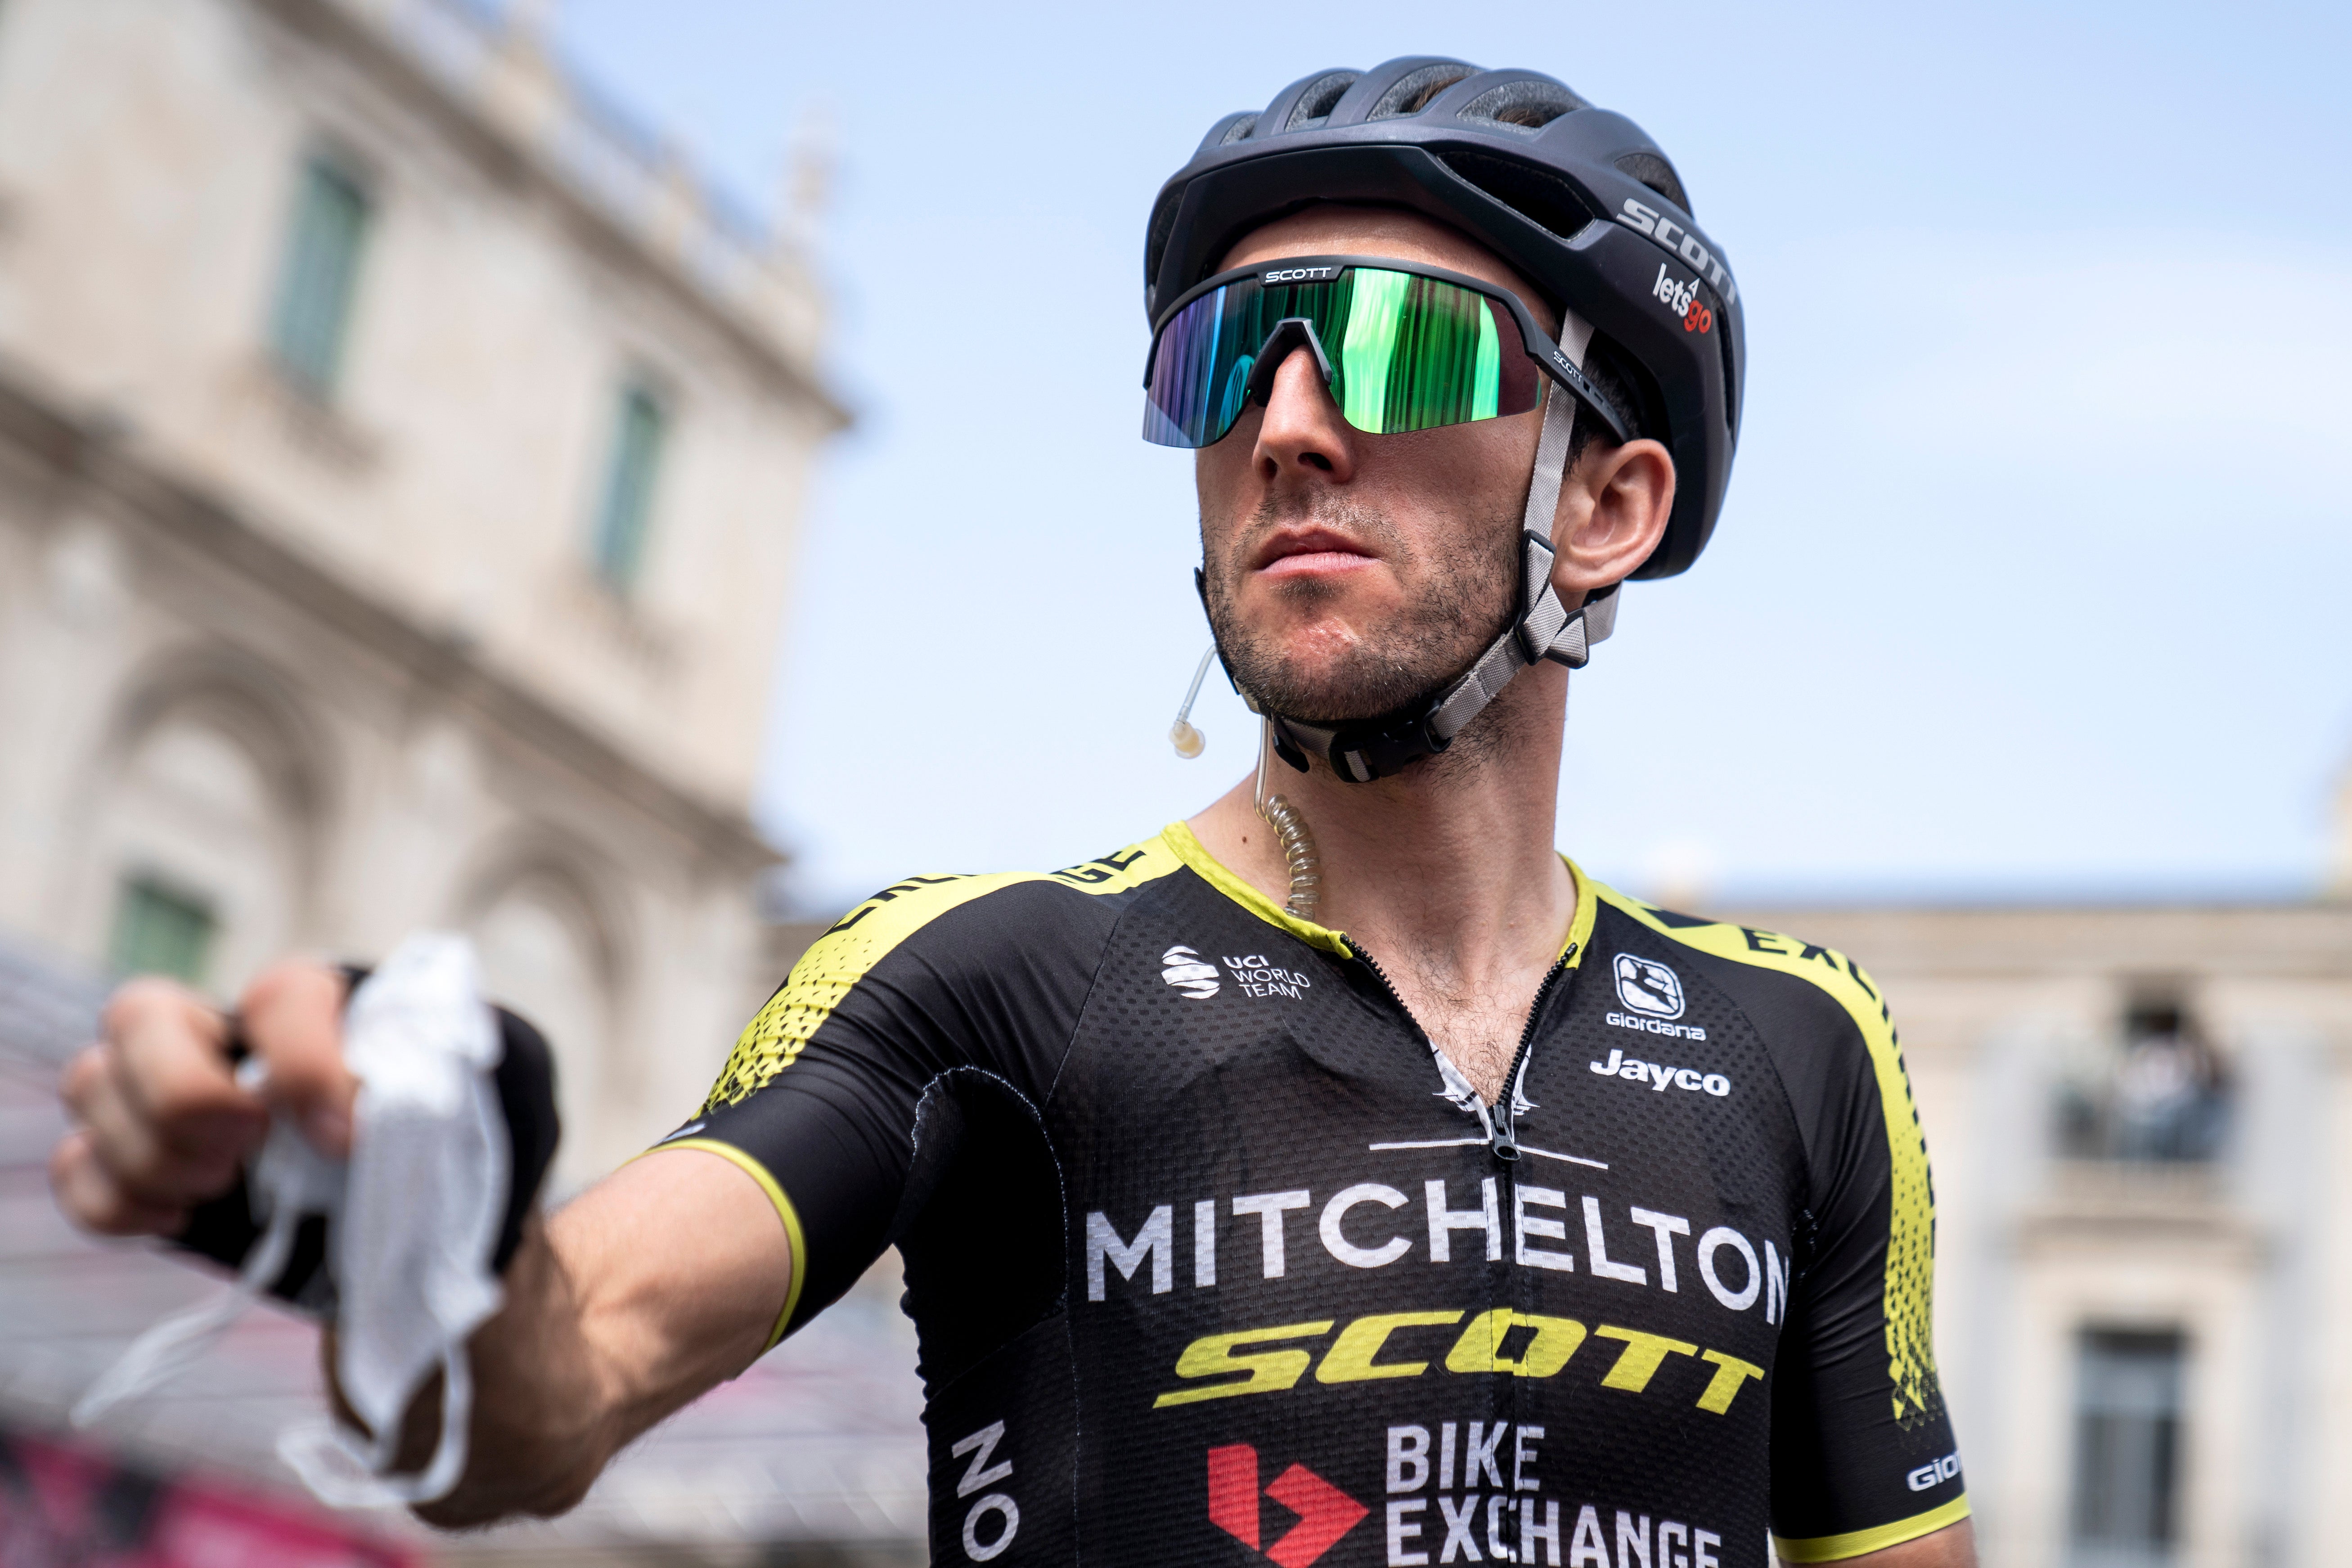 Simon Yates withdrew from the race over the weekend